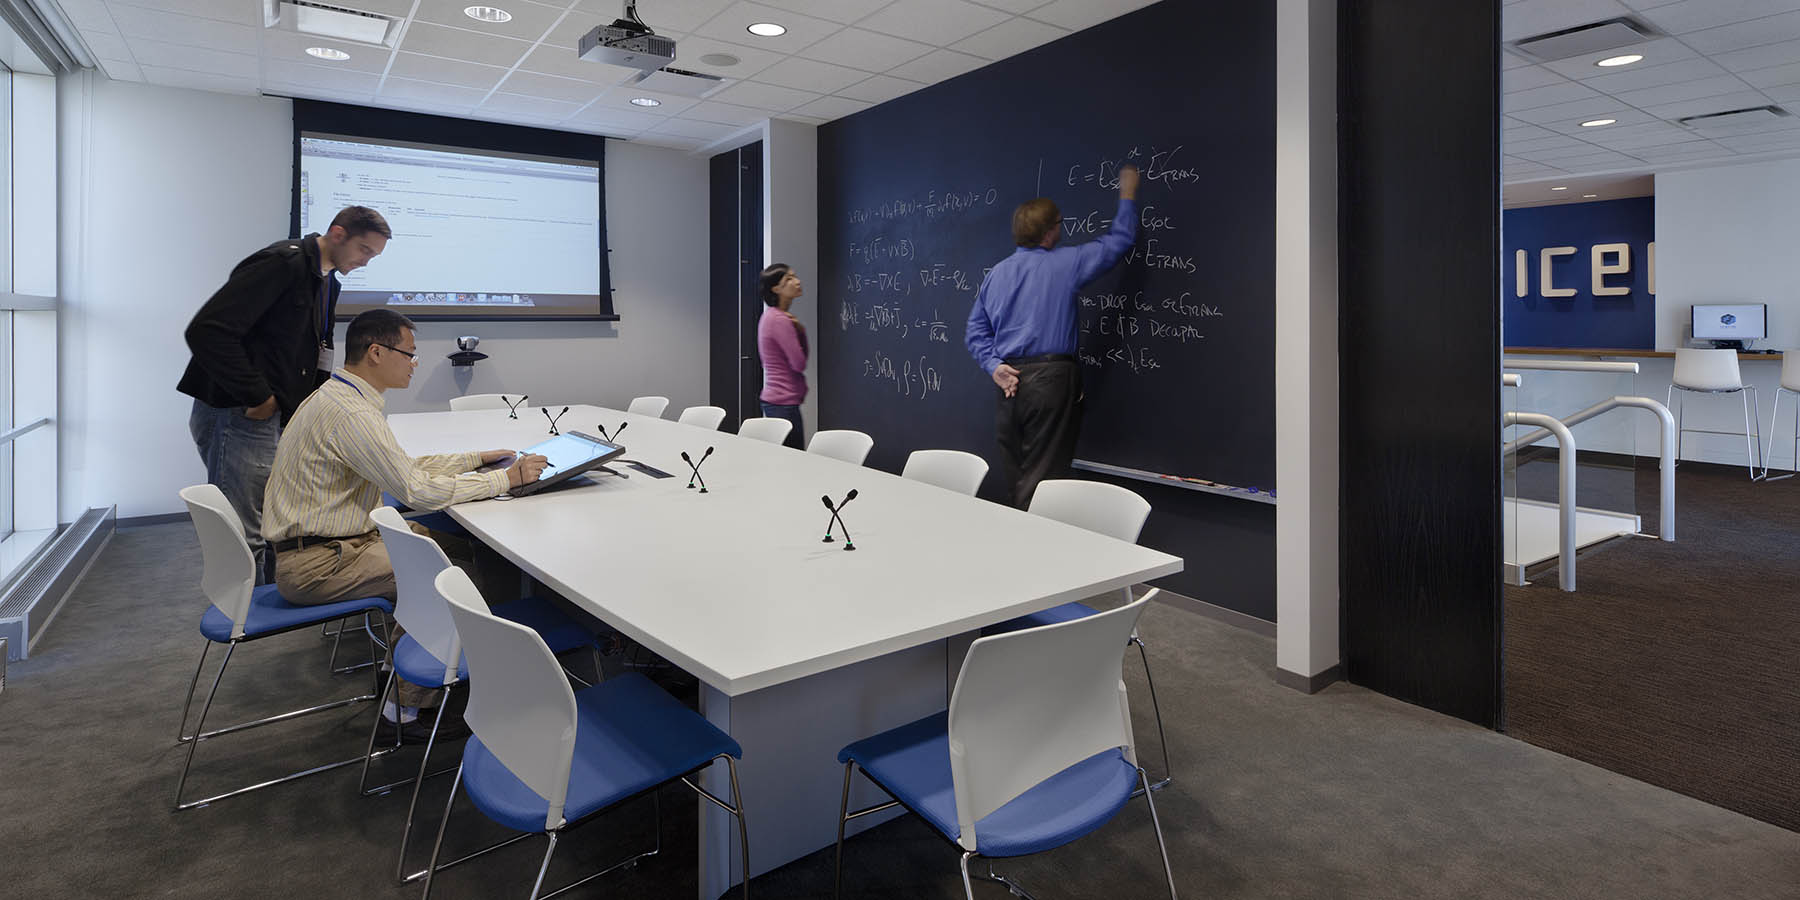 ICERM's conference room